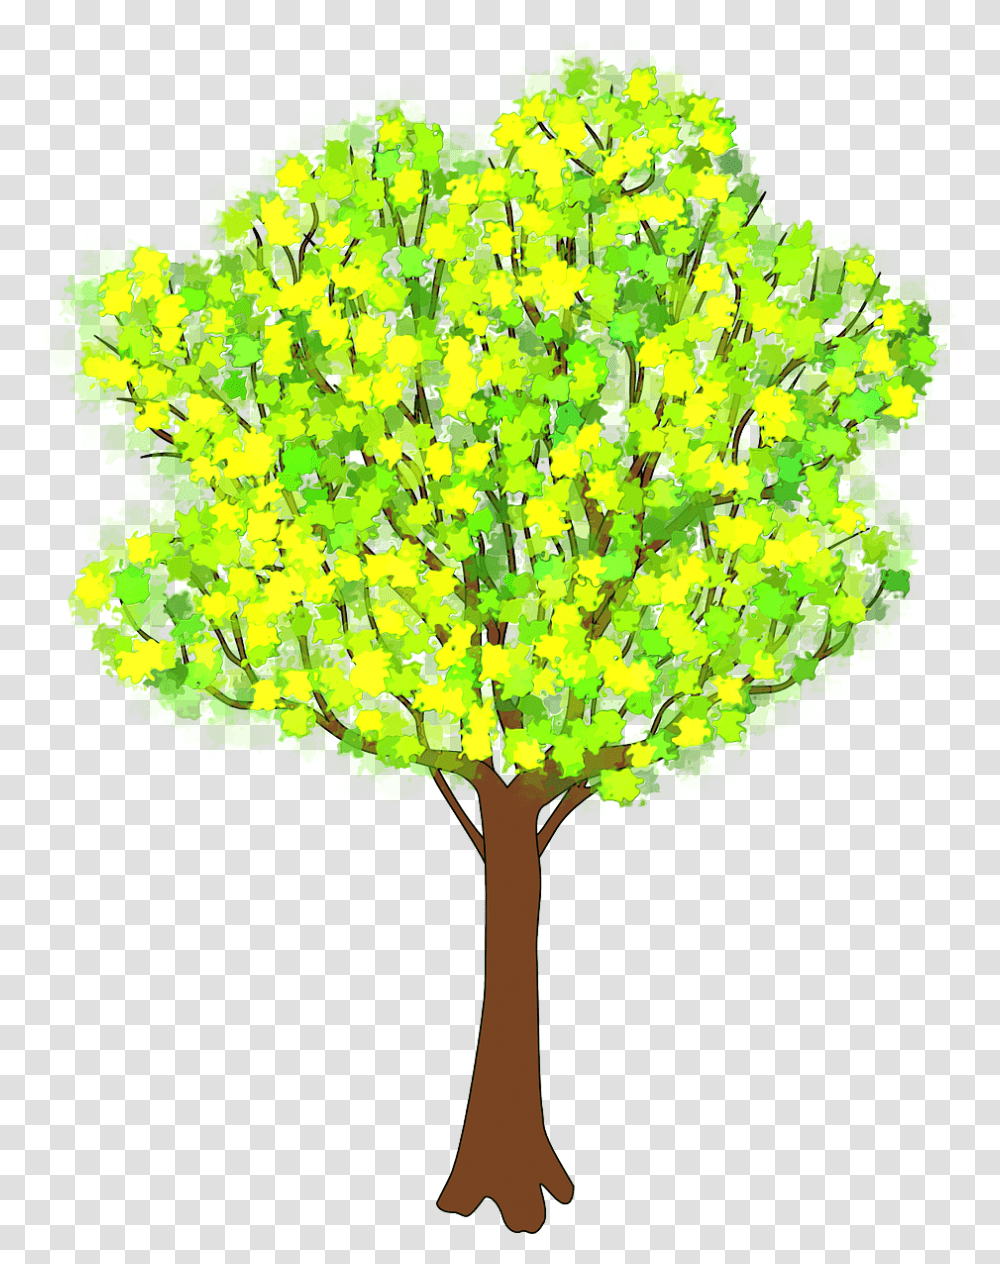 Tree Branches With Leaves, Plant, Leaf, Pattern Transparent Png